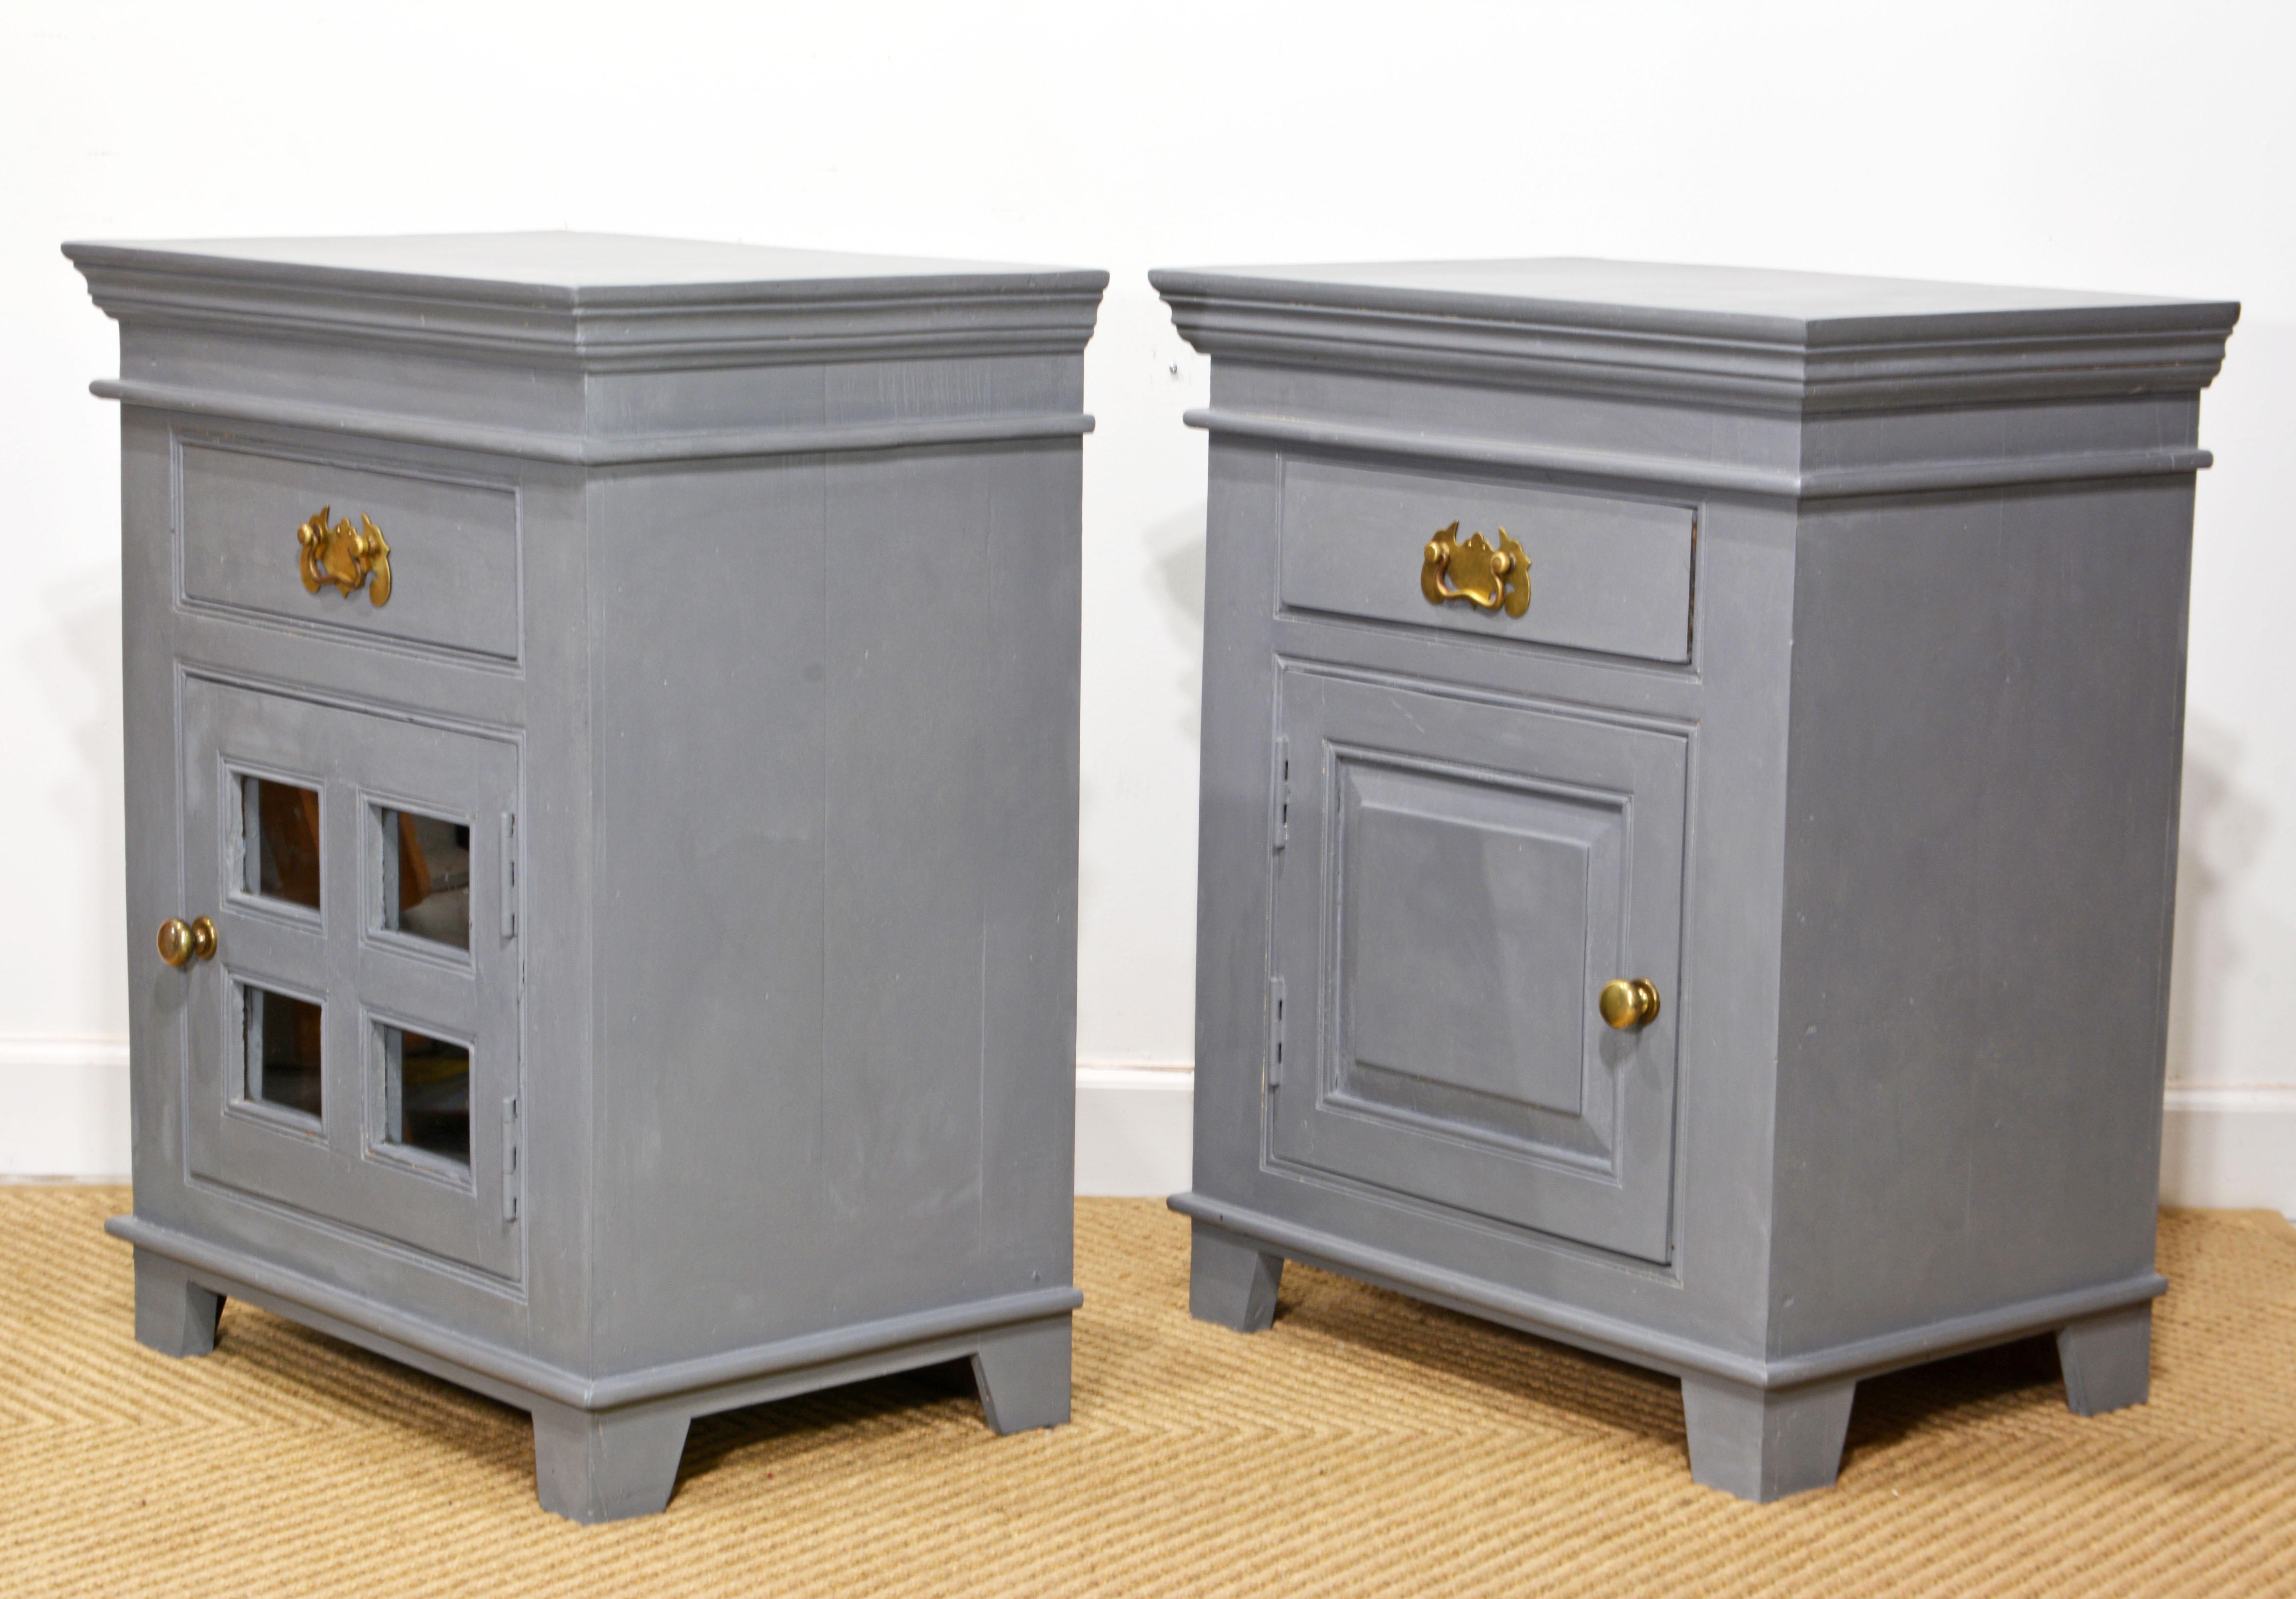 19th Century Two Anglo-Indian British Colonial Style Painted Hardwood Bedside Cabinets, 1950s For Sale